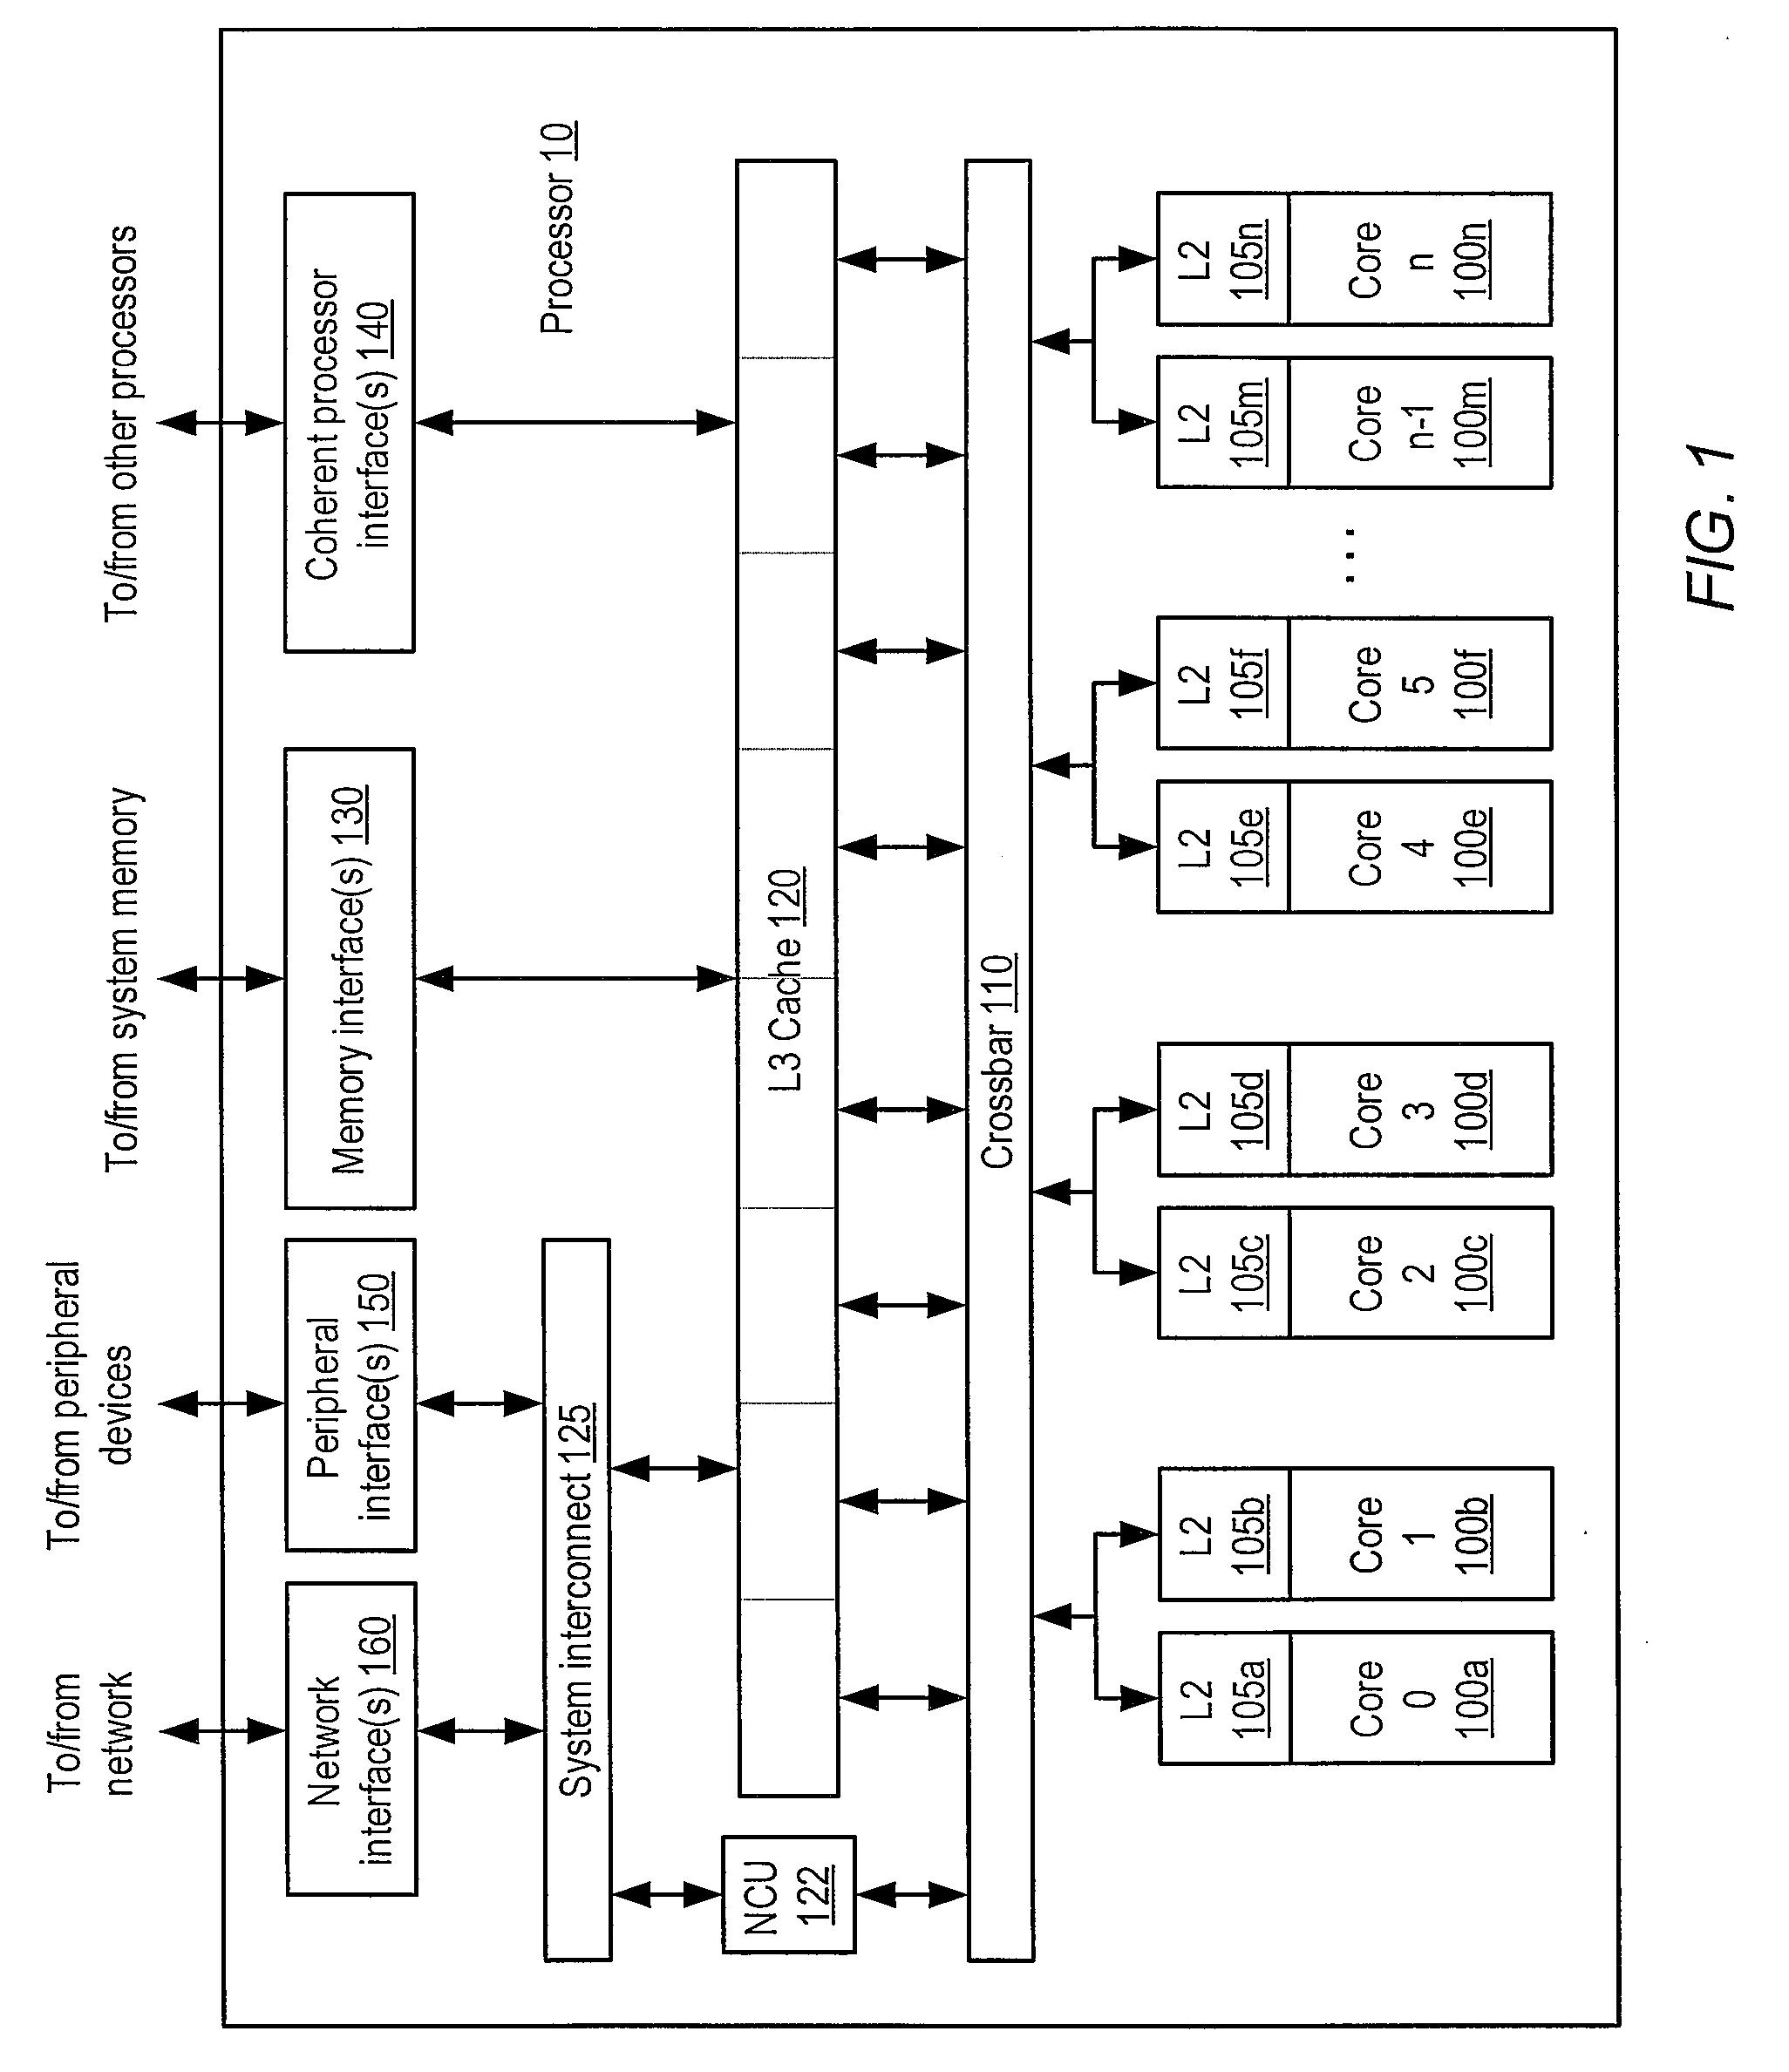 Cache coherent support for flash in a memory hierarchy